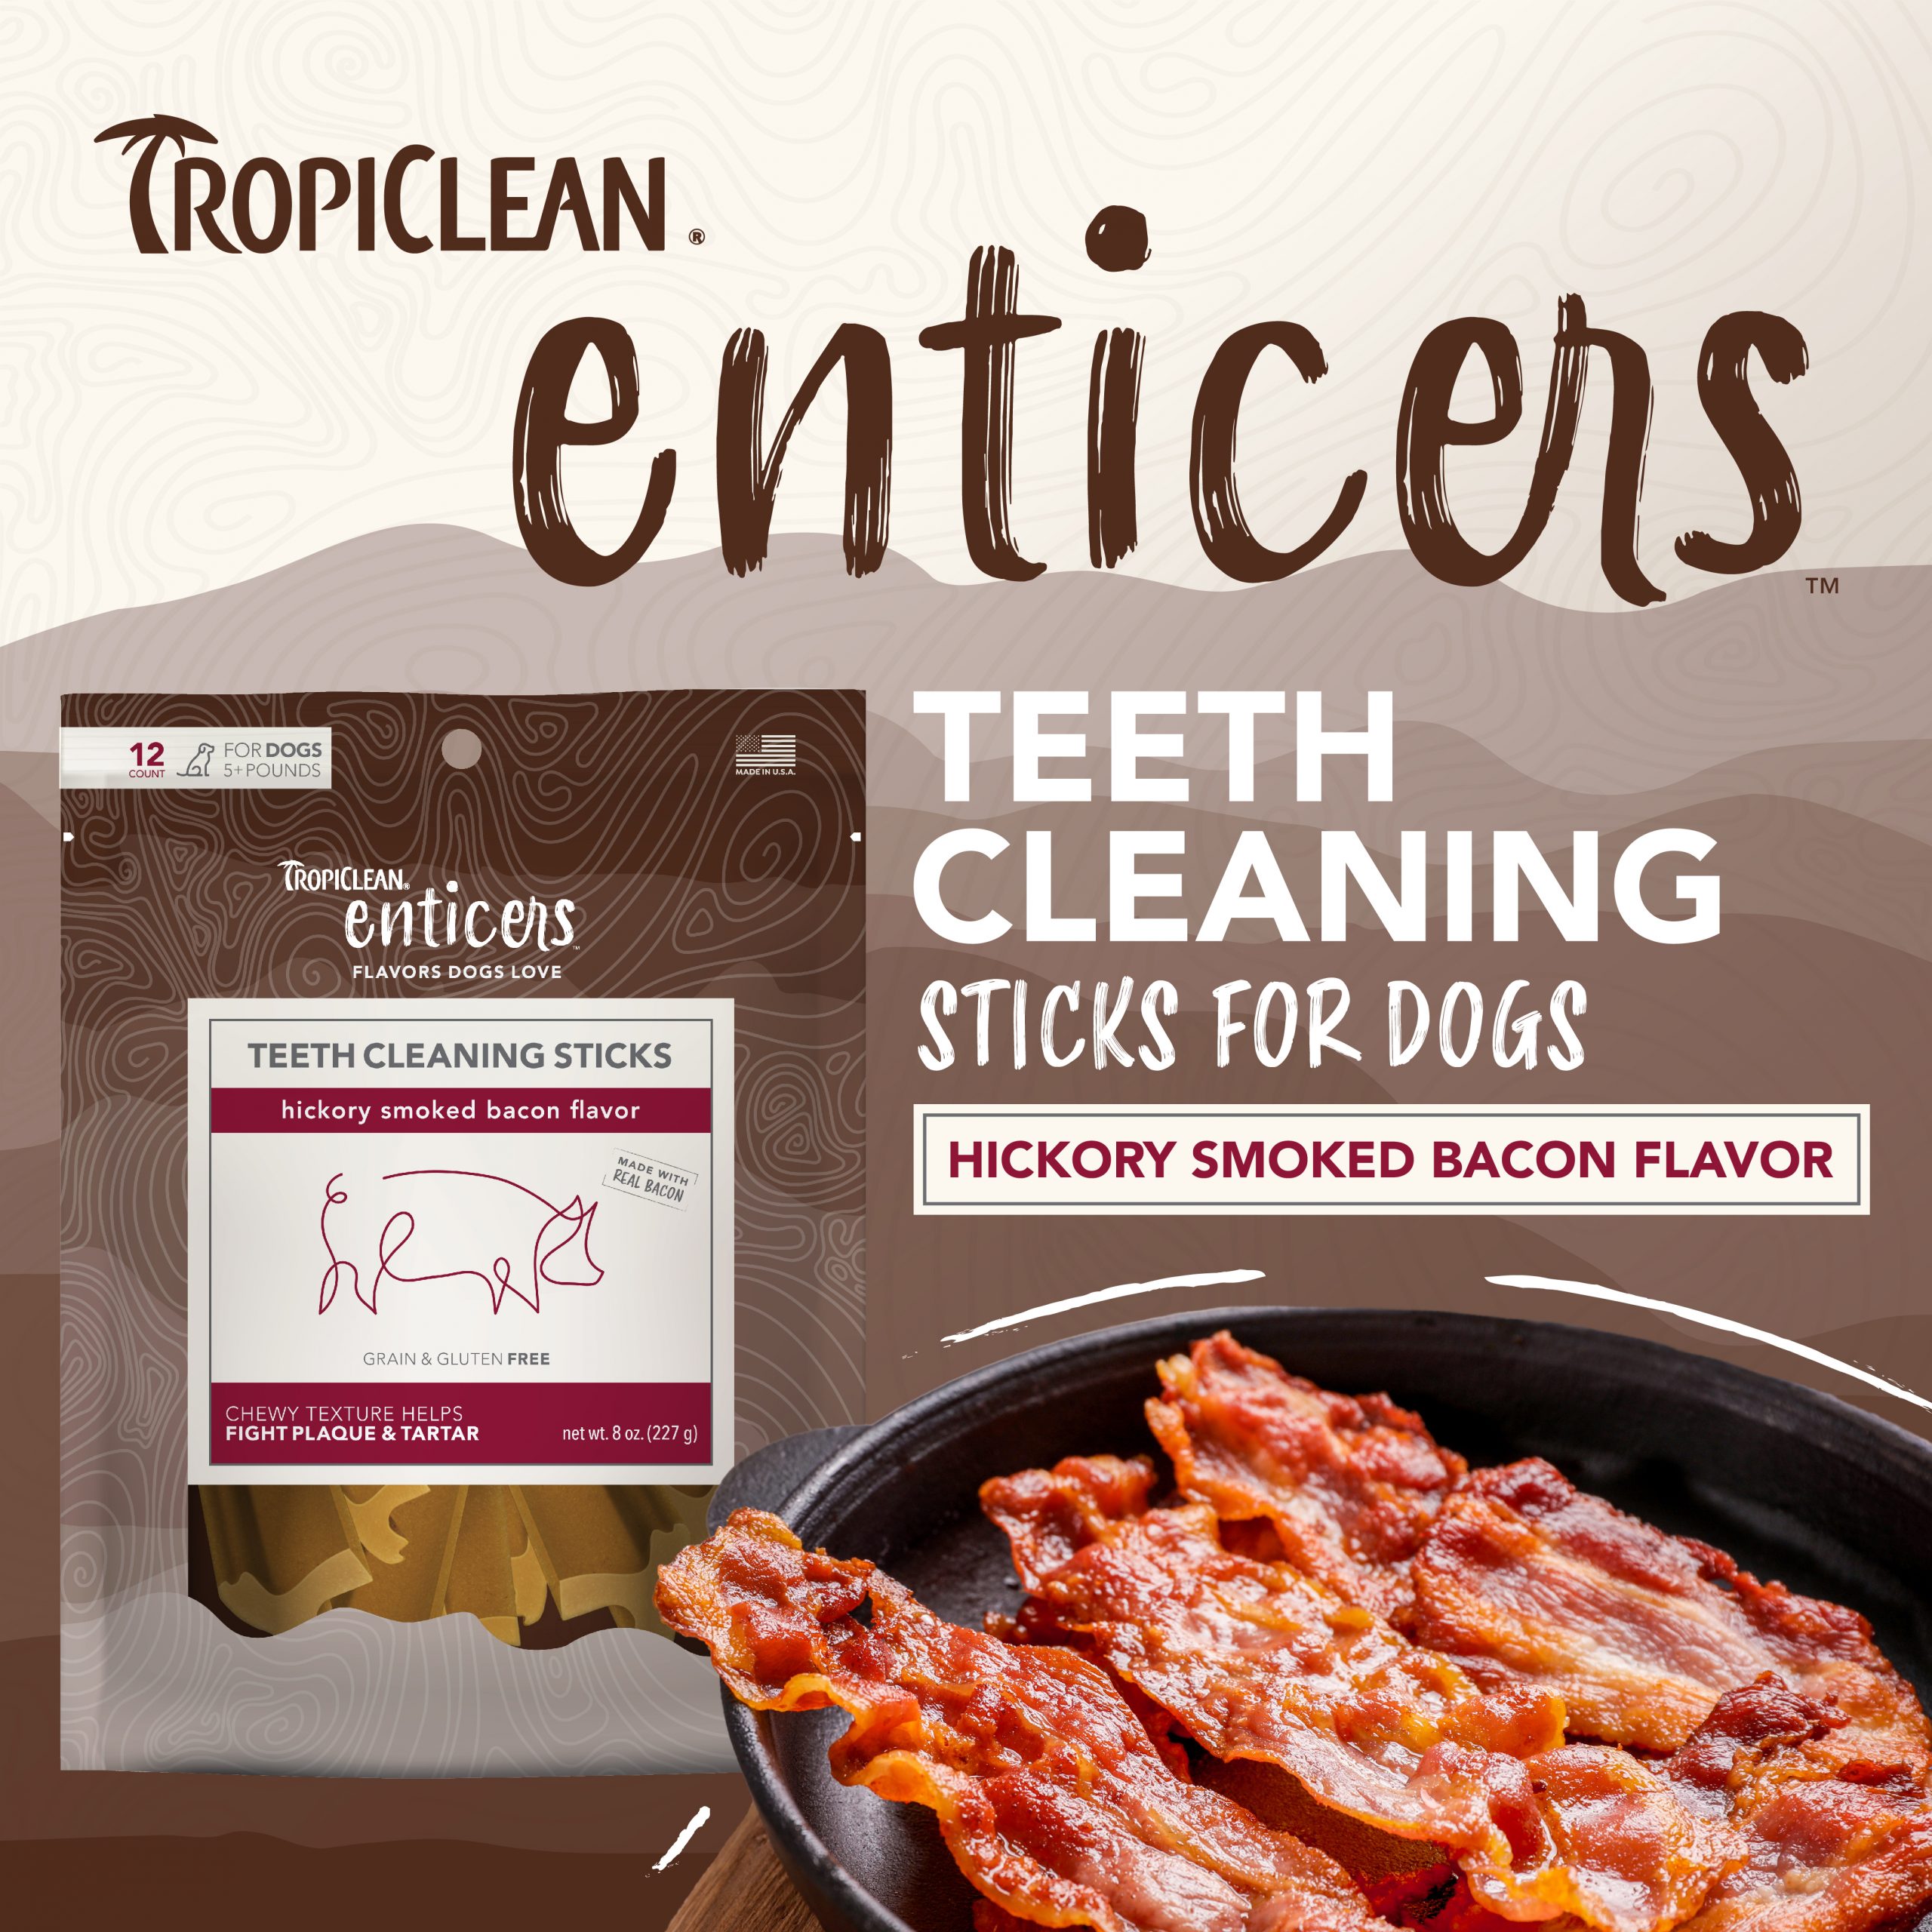 Teeth Cleaning Sticks for Dogs – Hickory Smoked Bacon Flavor